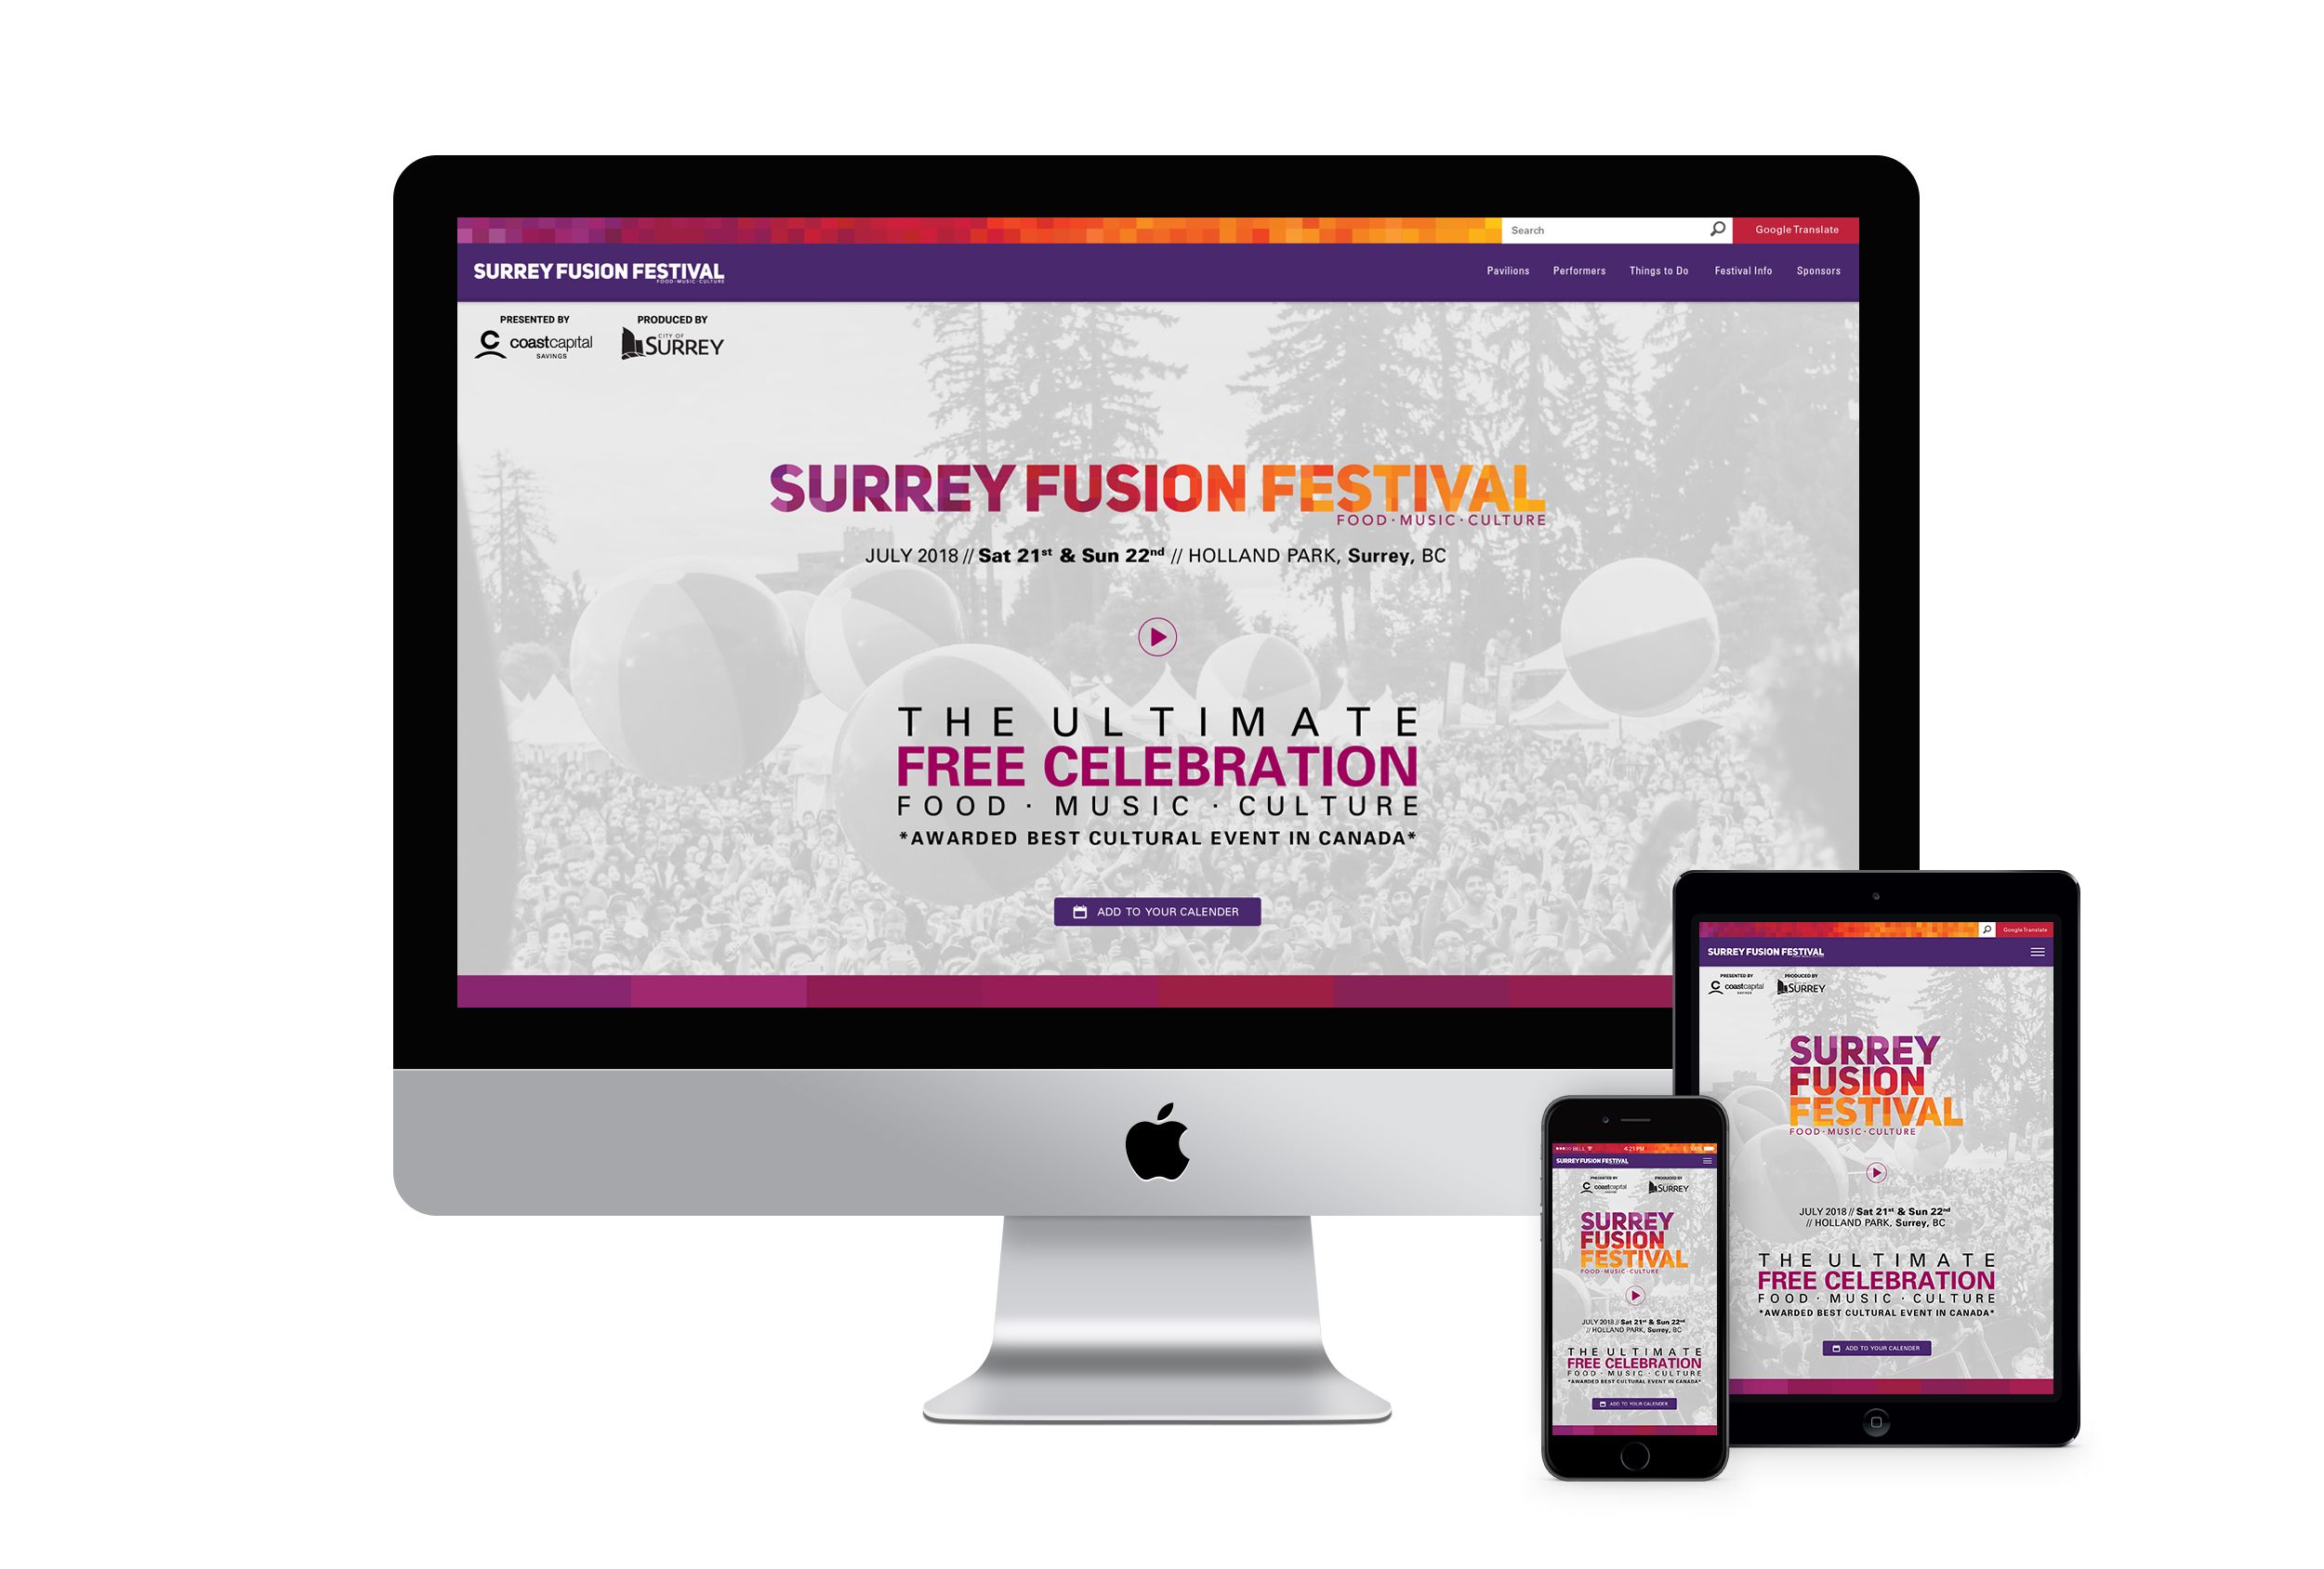 A mockup of the Surrey Fusion Festival website on an iMas, iphone, and ipad